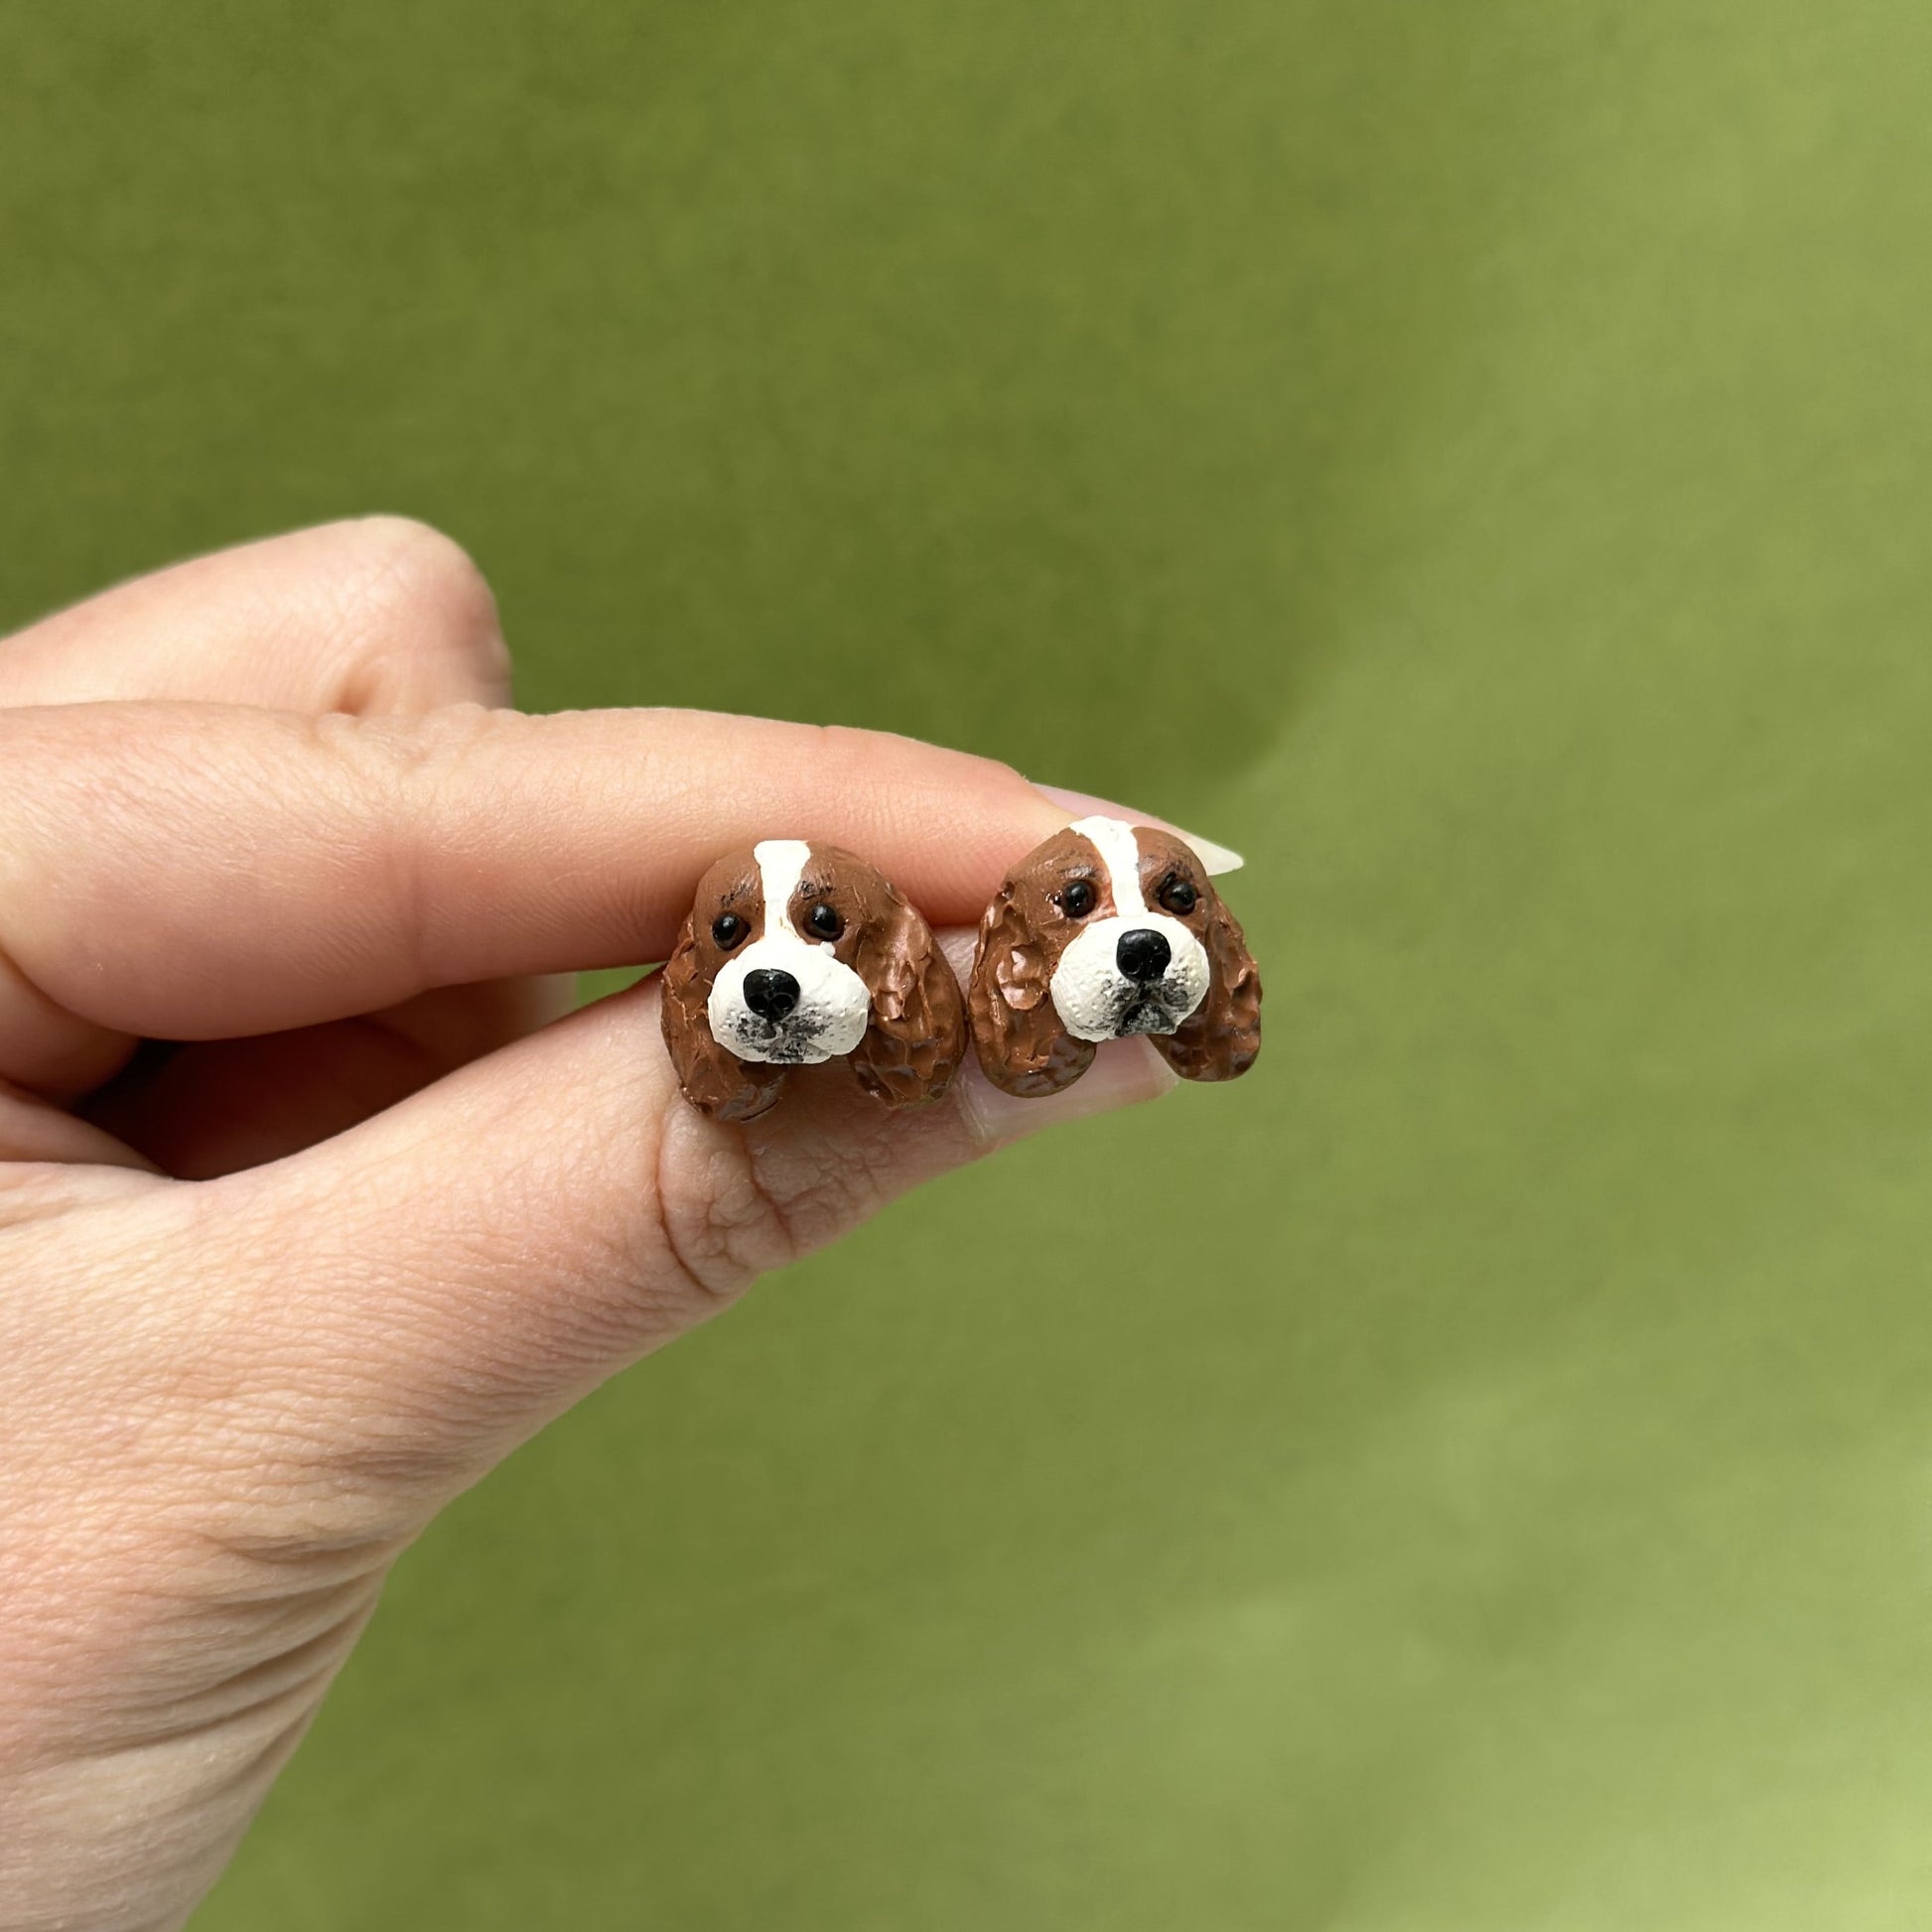 Handmade cavalier king charles spaniel stud earrings by Pawfect Love, positioned in front of green background